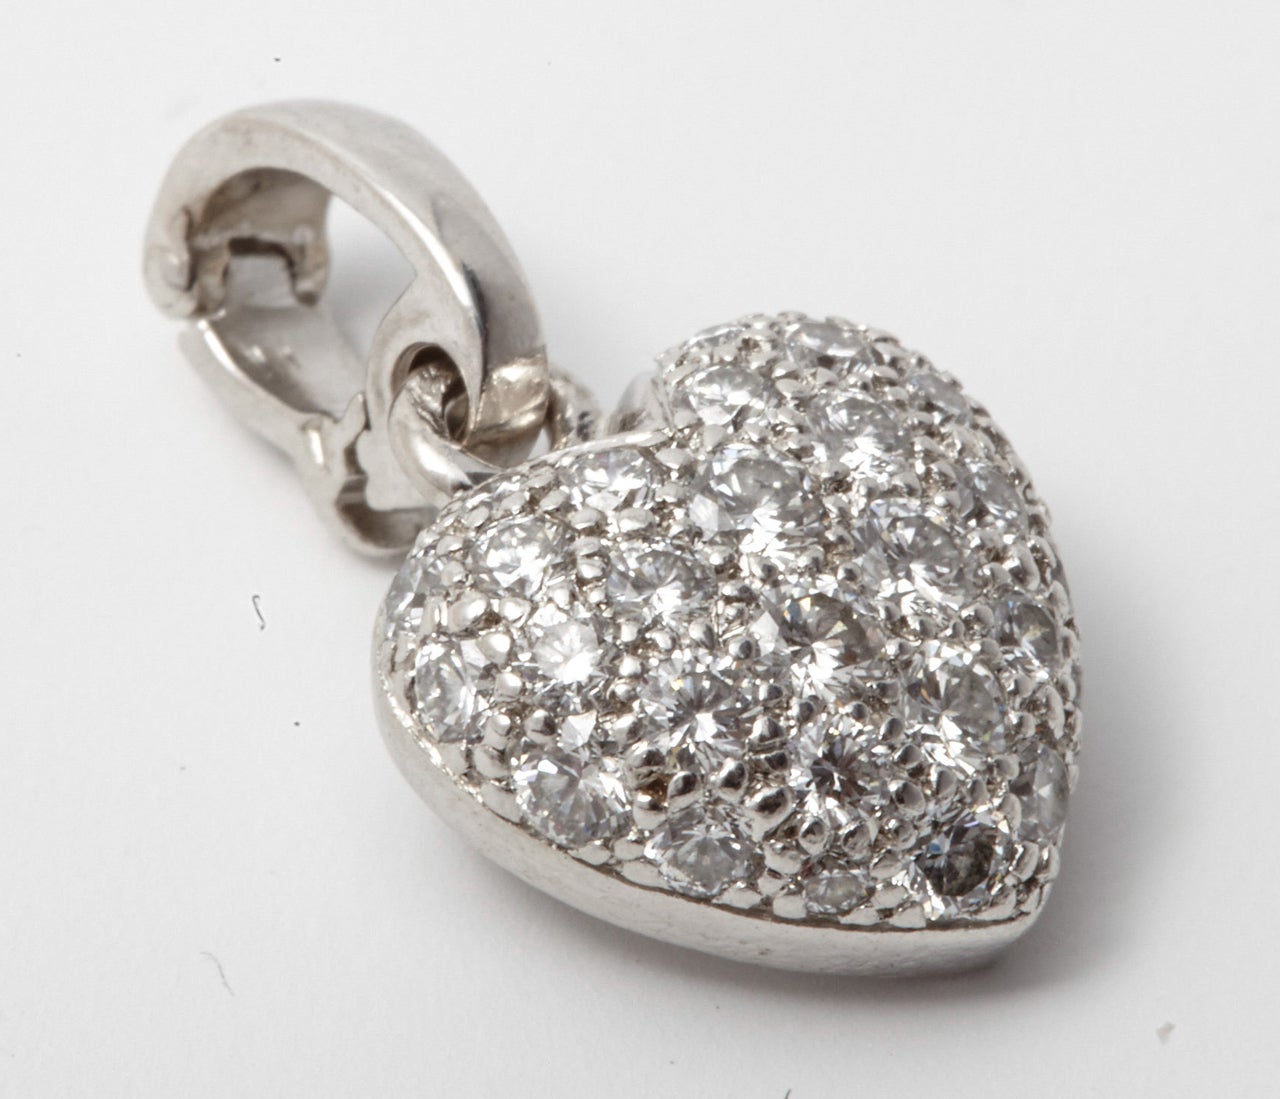 A  modern 18kt white gold heart shaped pendant pavé set with brilliant cut diamonds weighing approximately 0.30 cts, engraved Cartier and ND9124.

All of our prices exclude VAT.